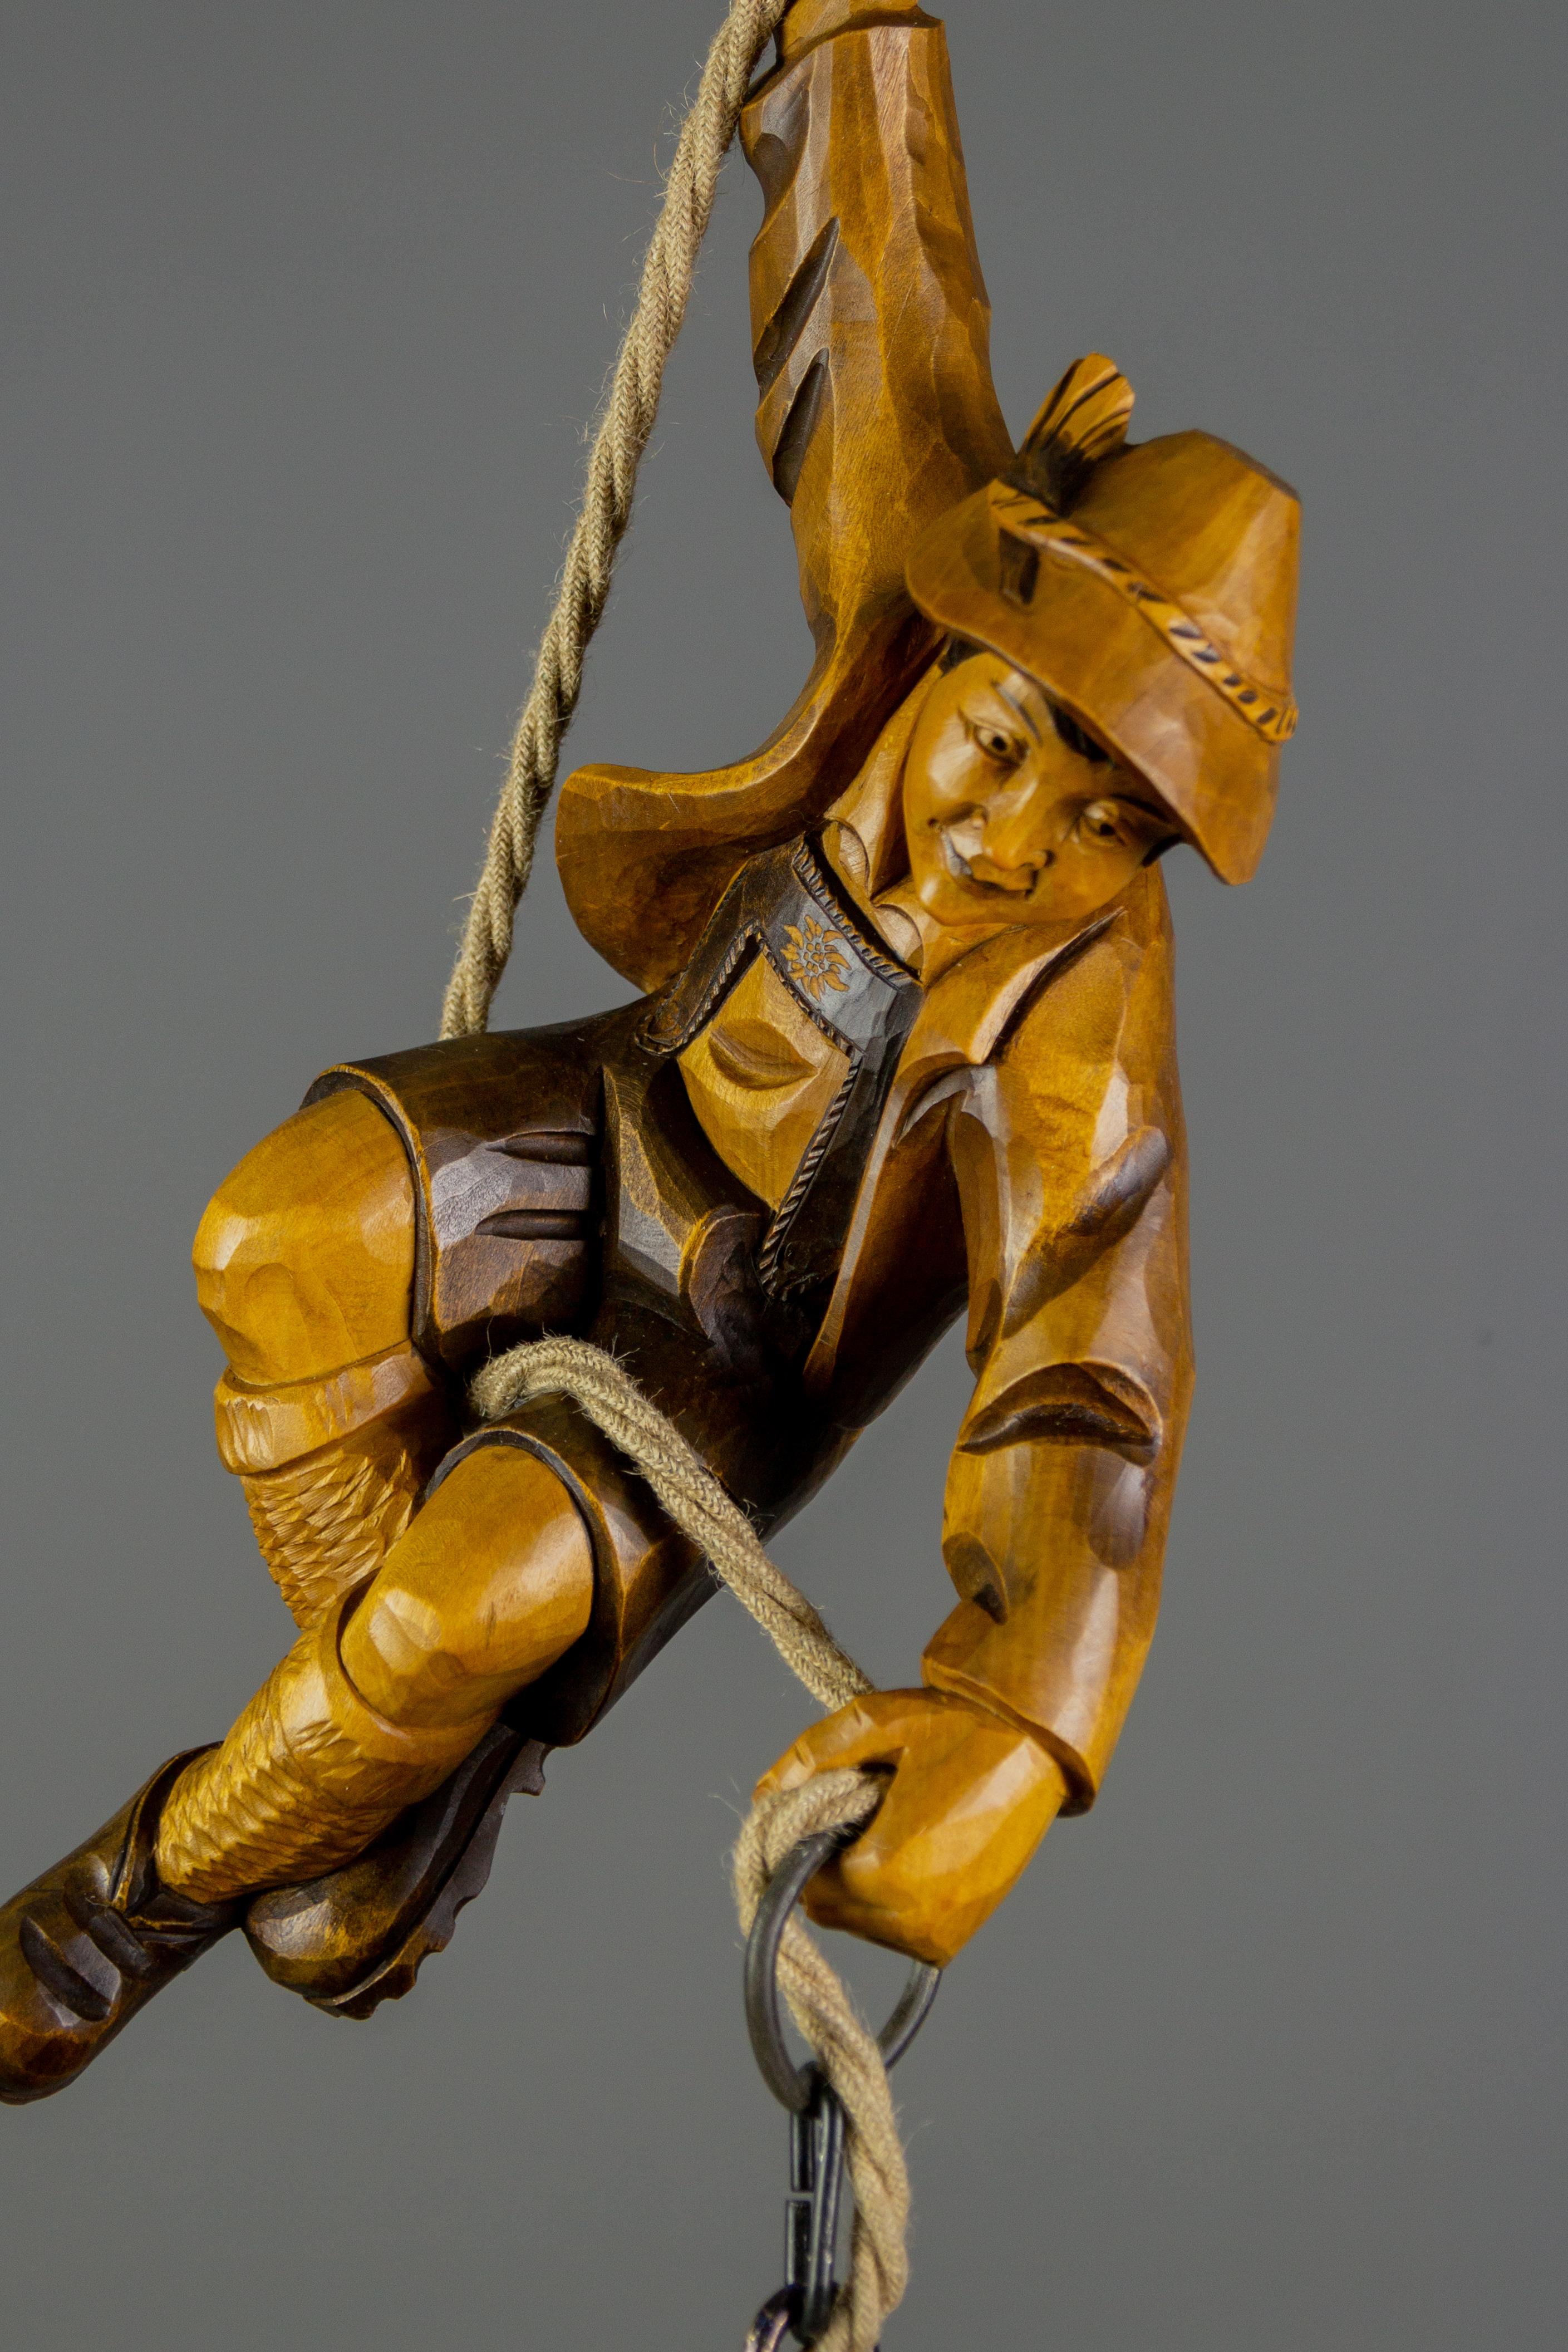 Wonderful German figural pendant lamp features a hand-carved figure of a mountain climber. The detailed carved wooden mountaineer is holding onto a rope and holding a lantern in one hand. The figure is in beautiful brown colors.
The height of the